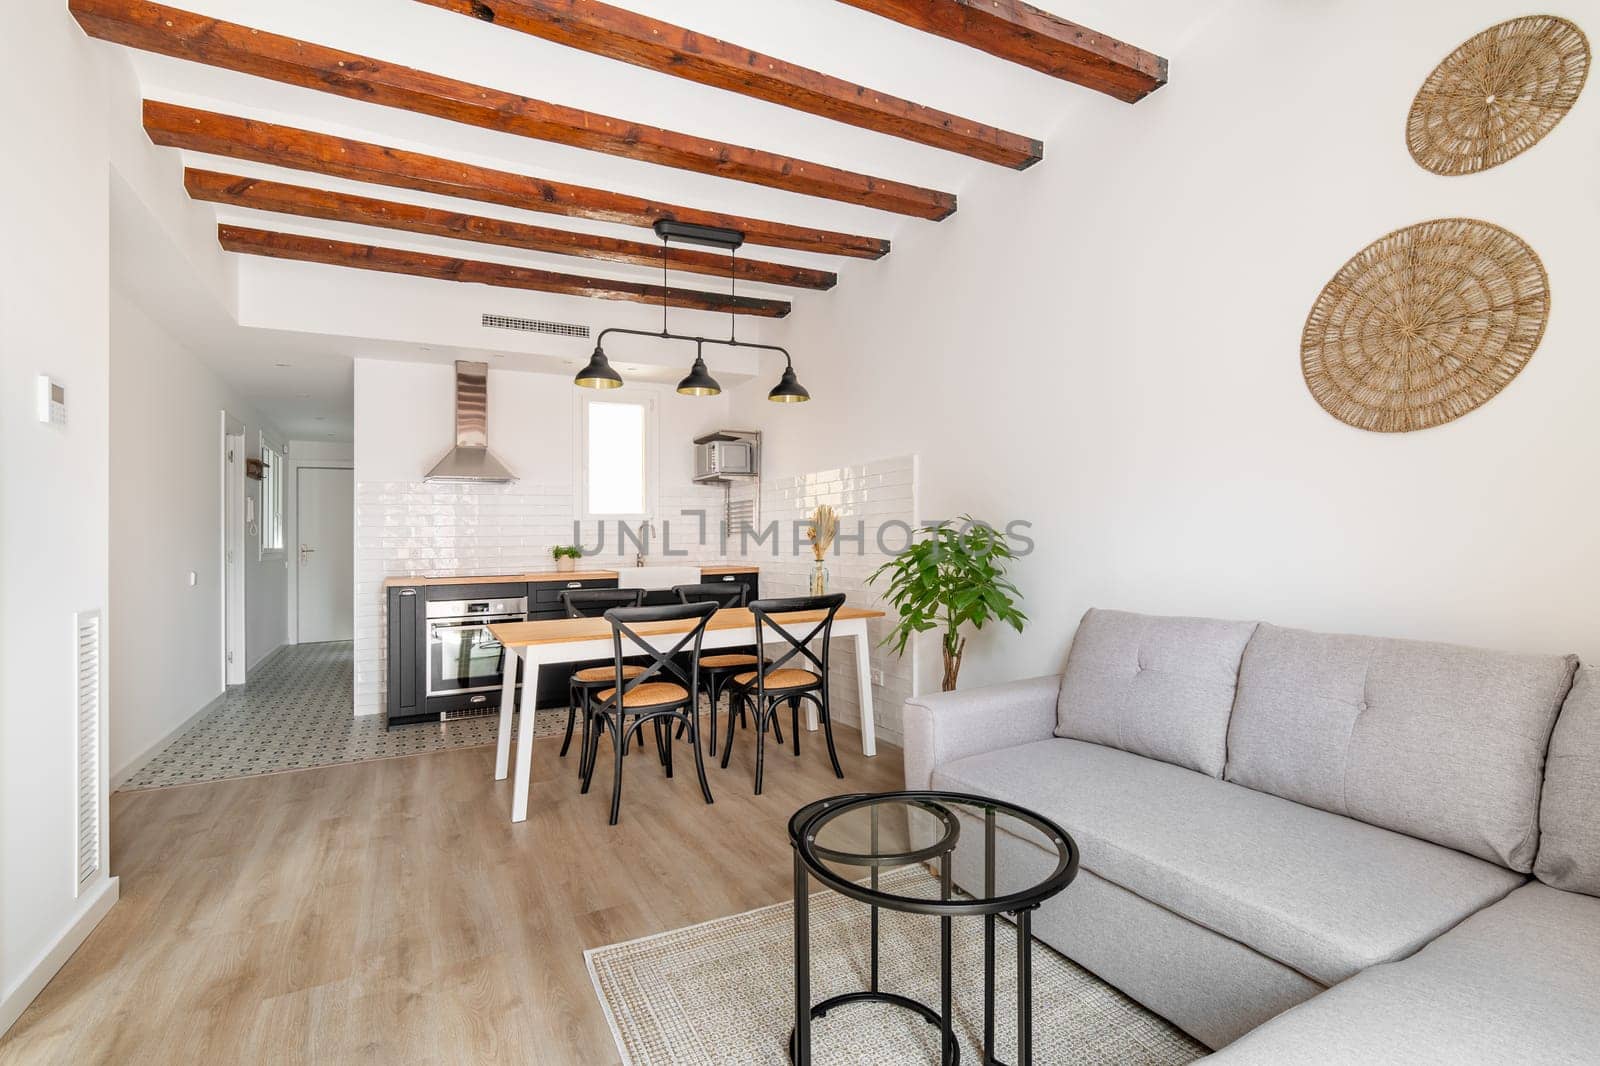 Horizontal shot small studio apartment with a combined living room and kitchen in a modern loft style with stylish appliances and furniture. Mortgage concept for a young family with renovation.